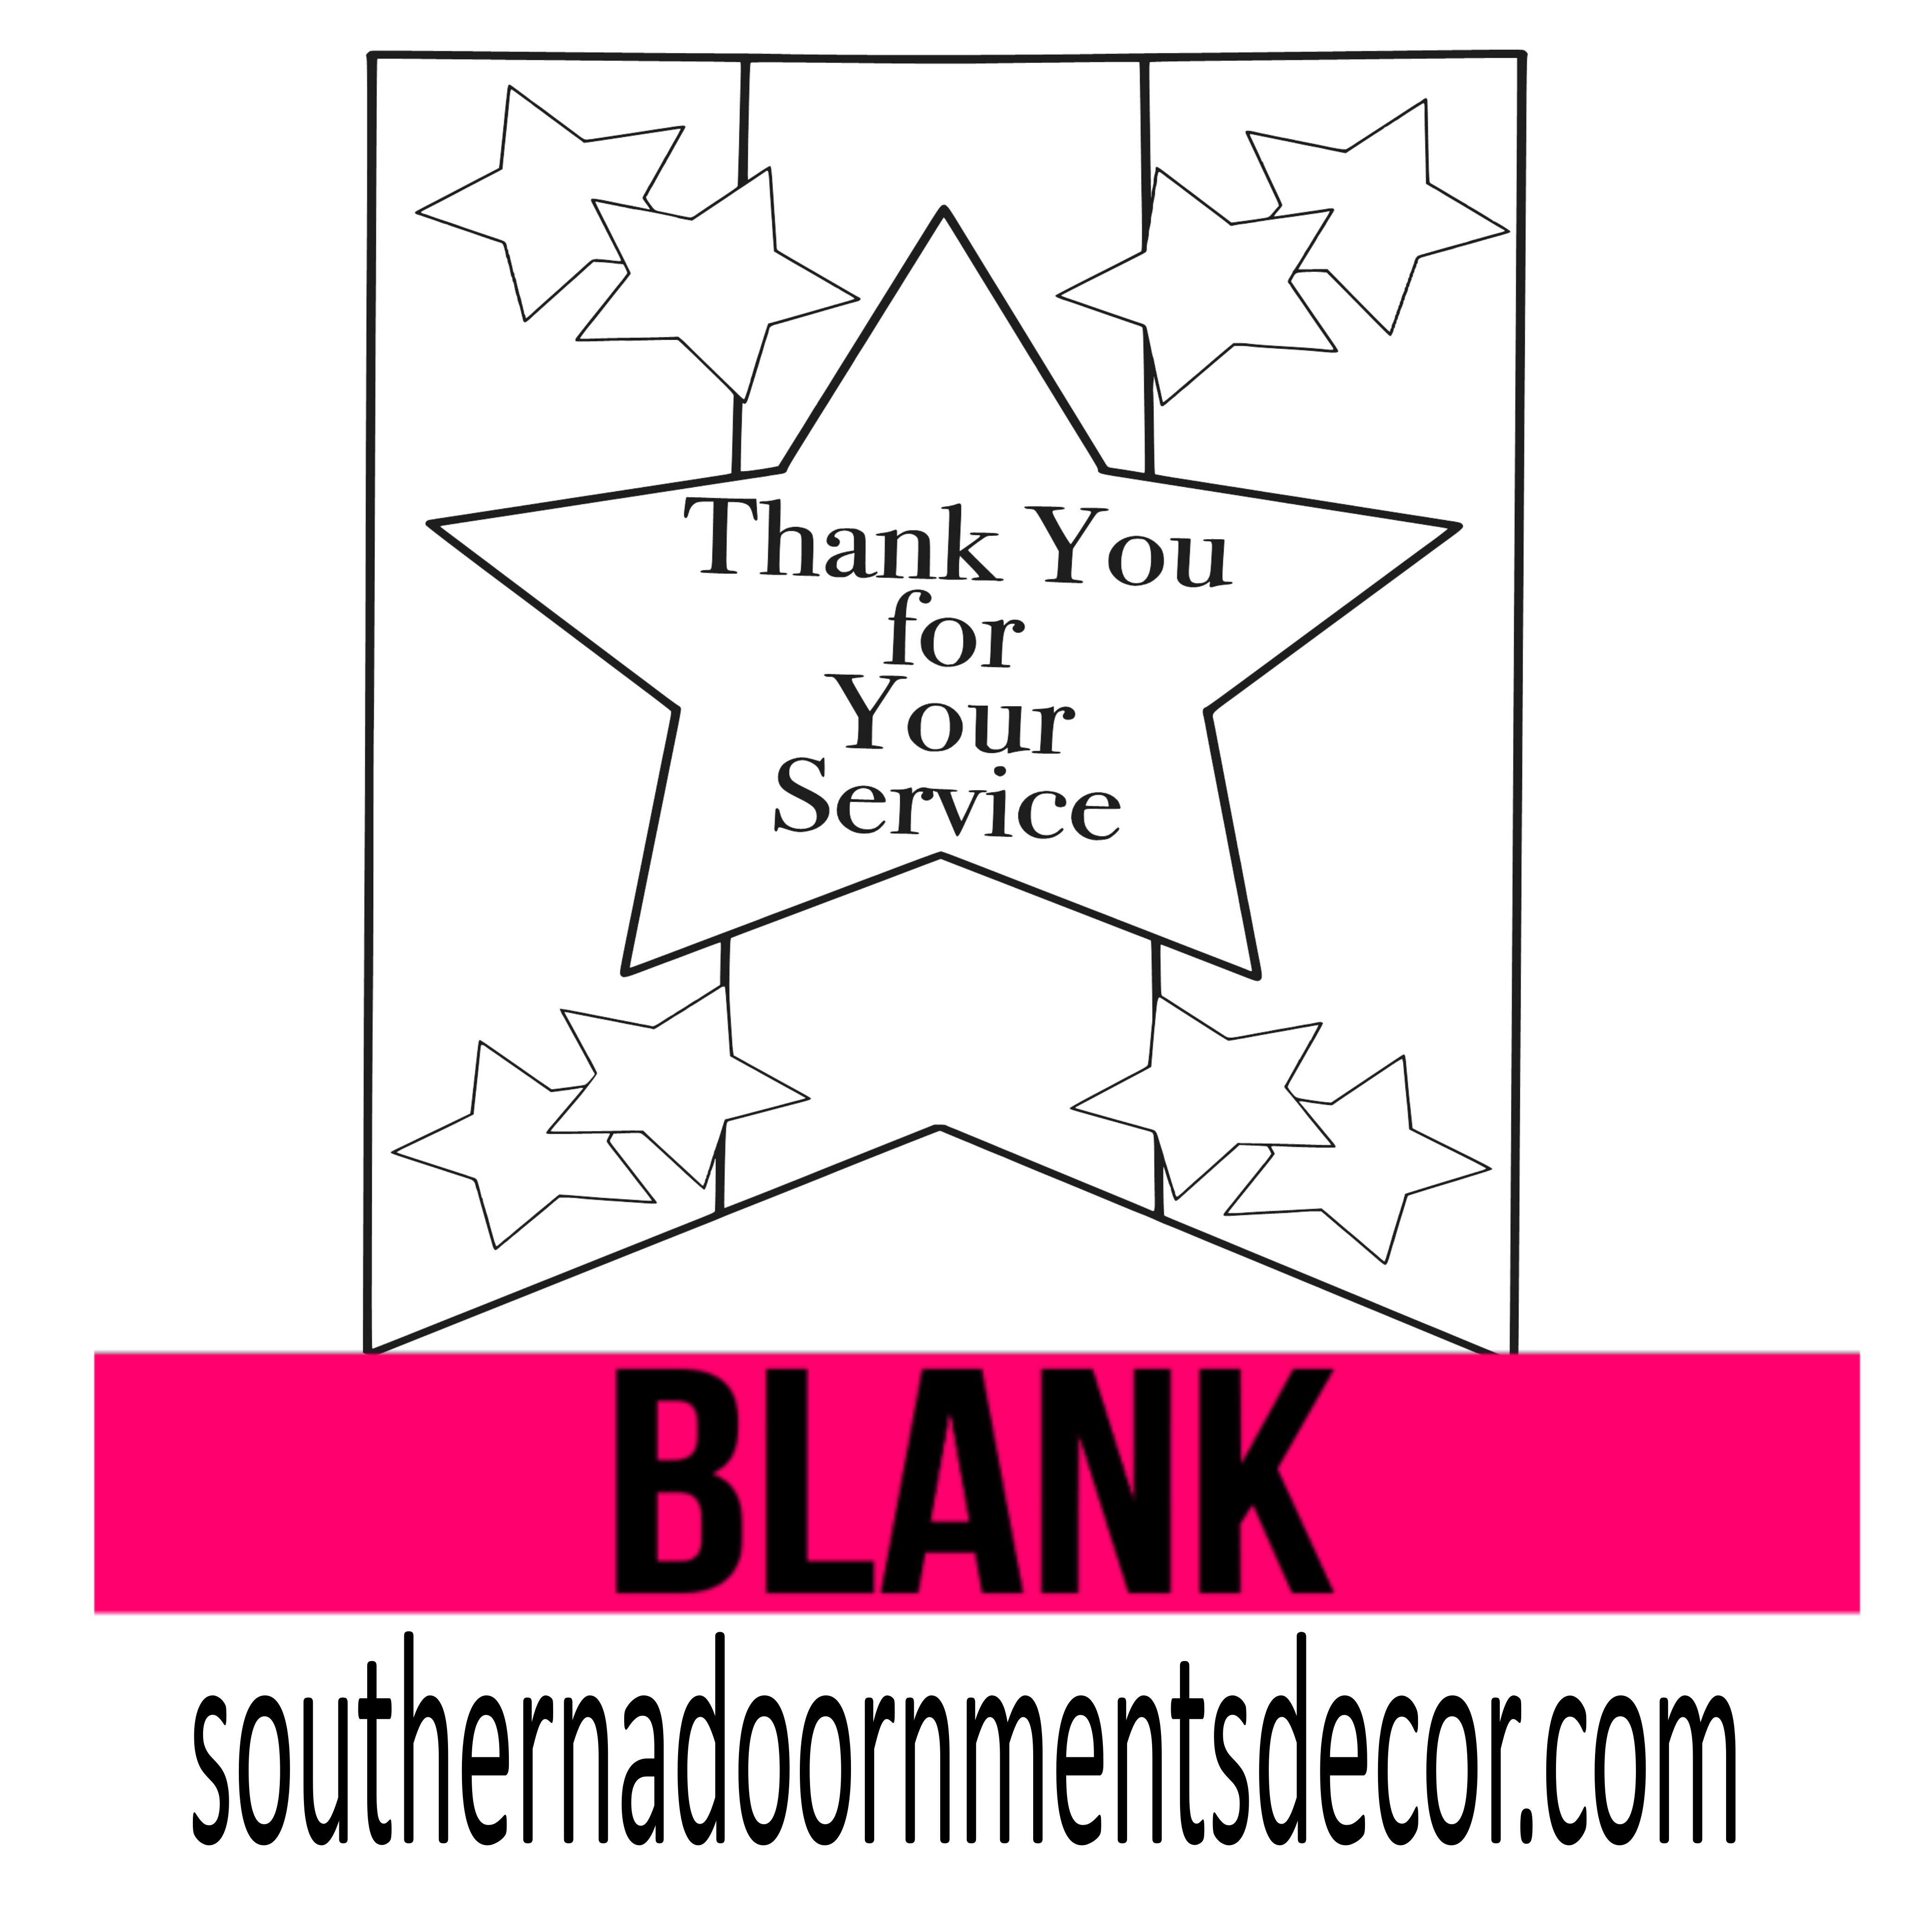 Thank You for Your Service BLANK